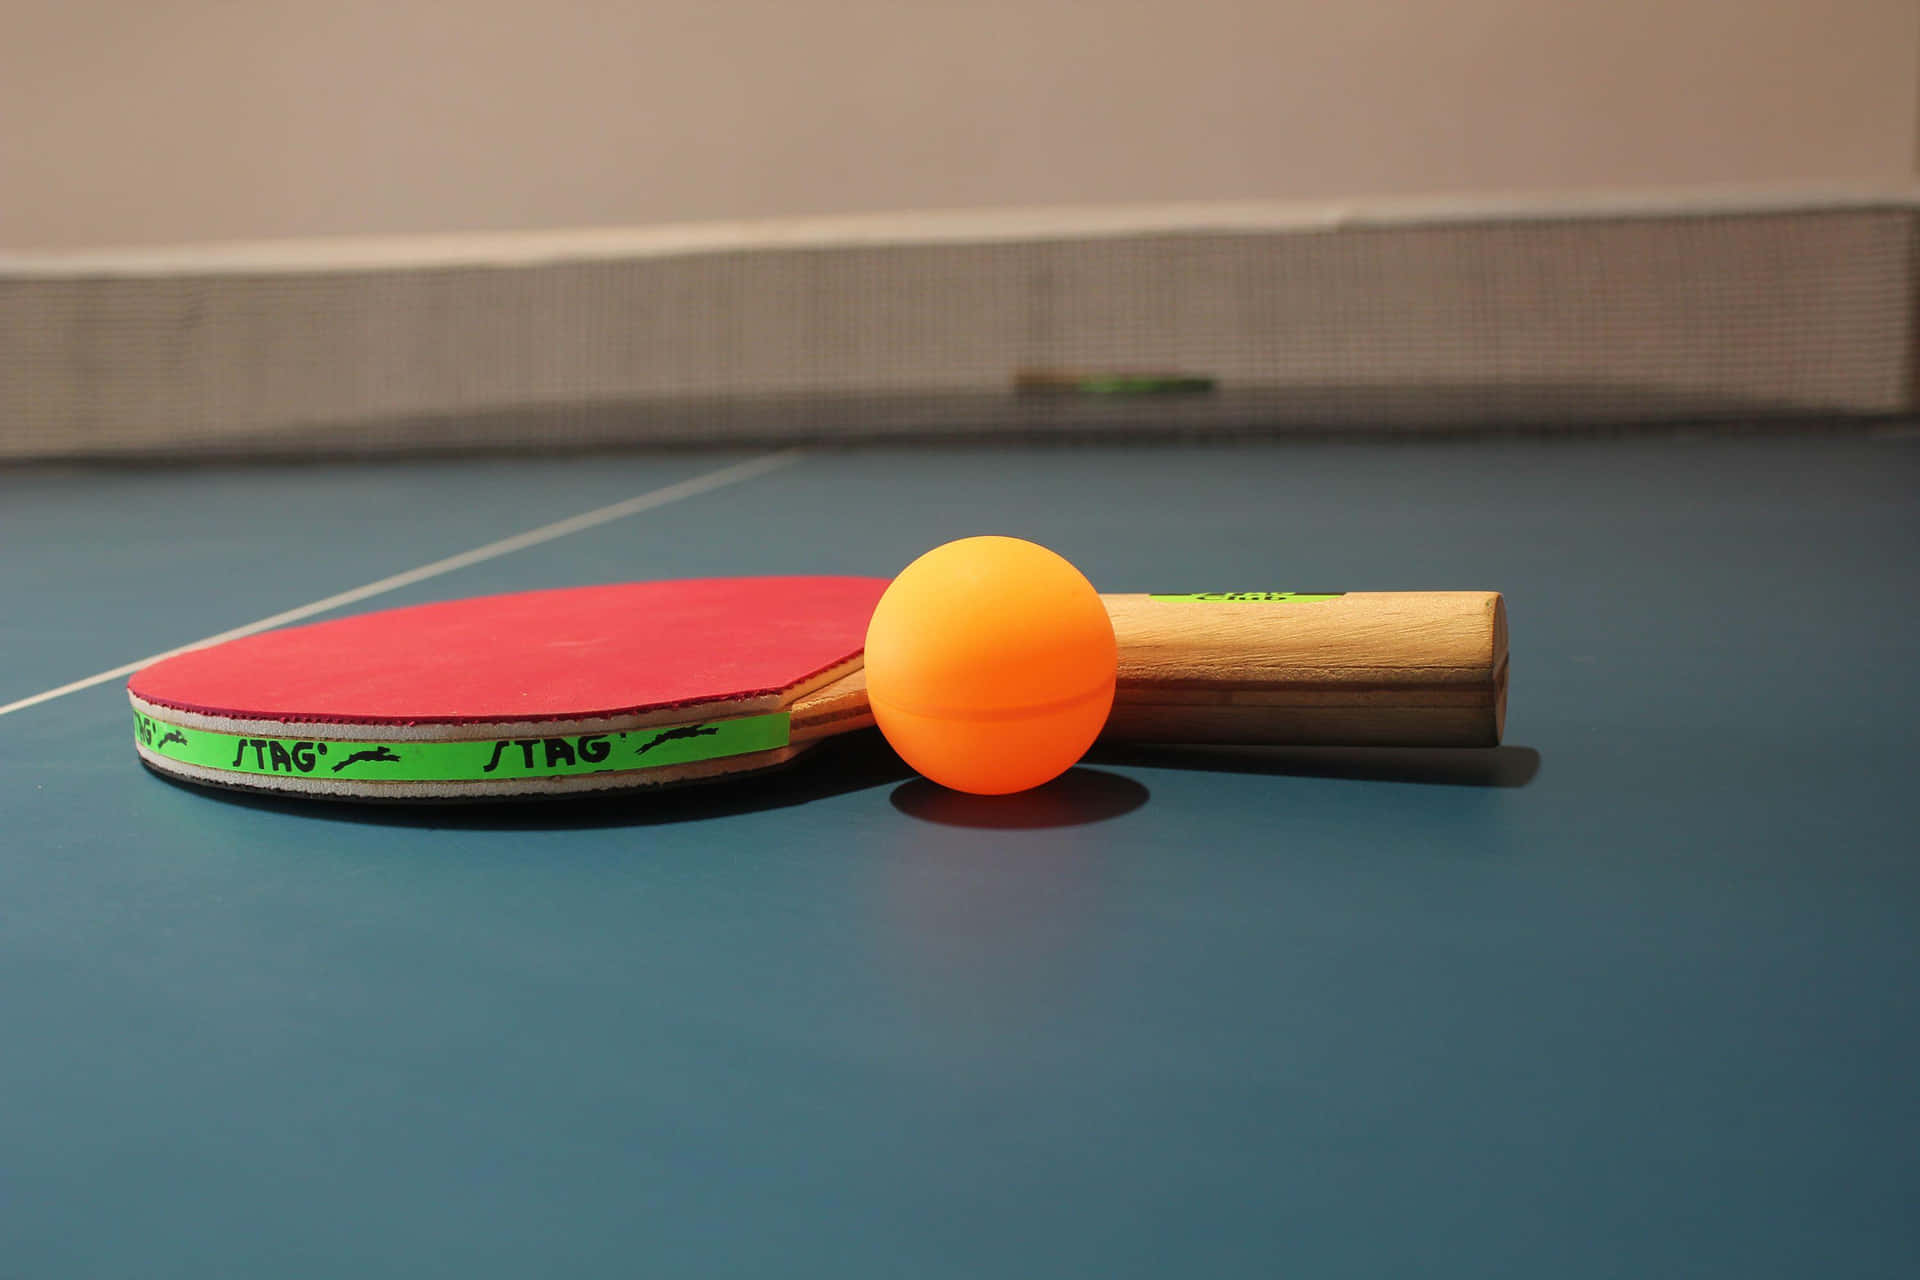 Get ready for an exhilarating table tennis match!